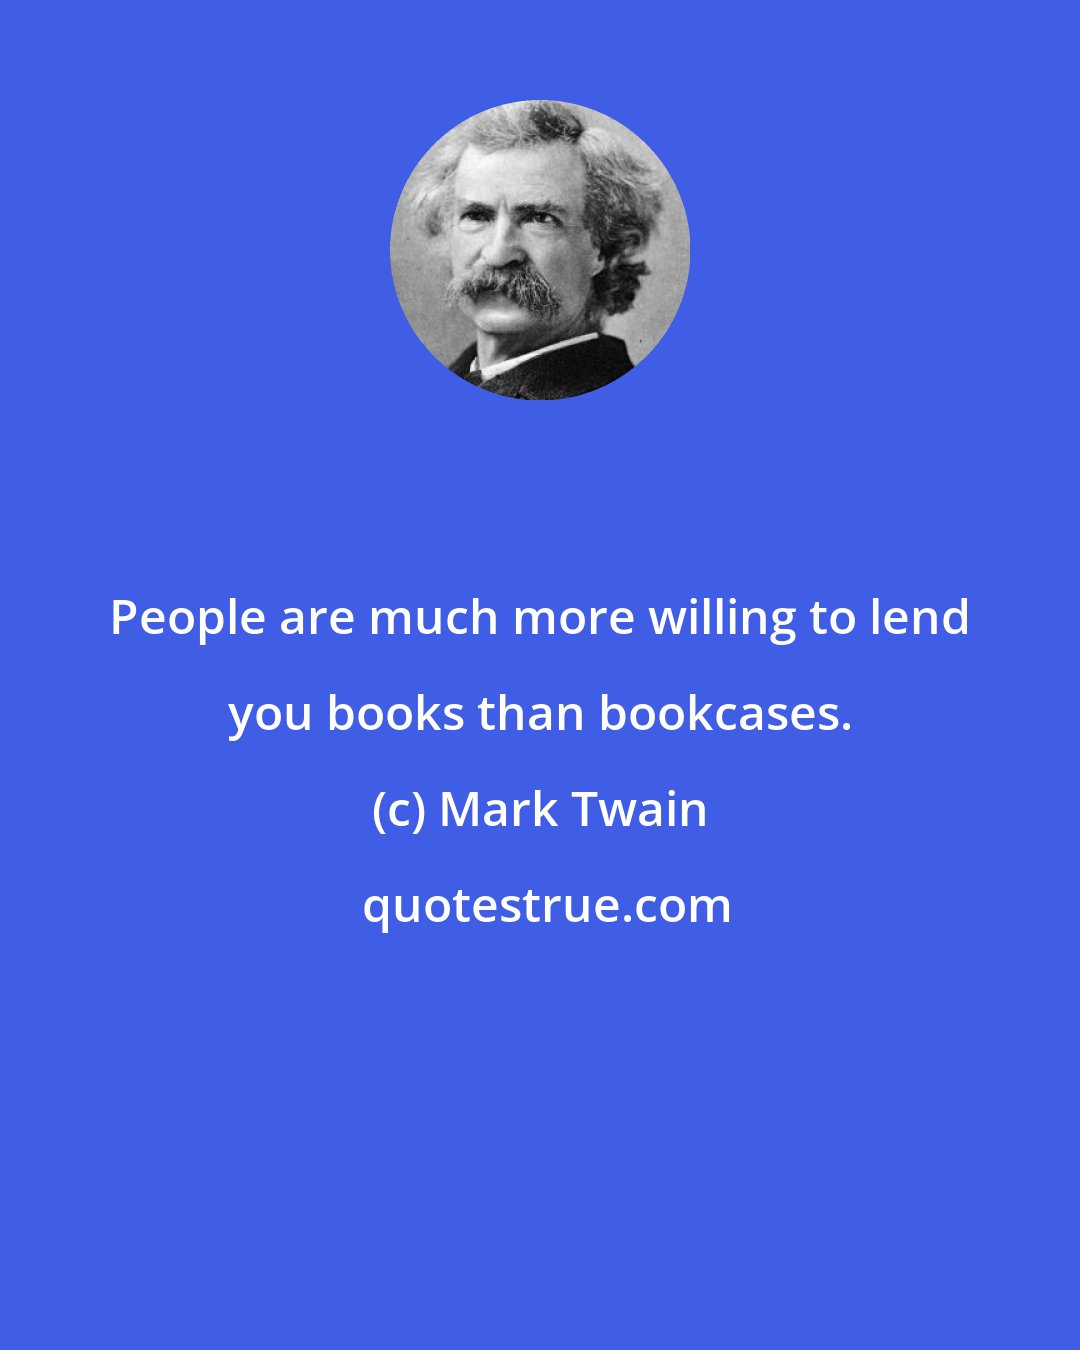 Mark Twain: People are much more willing to lend you books than bookcases.